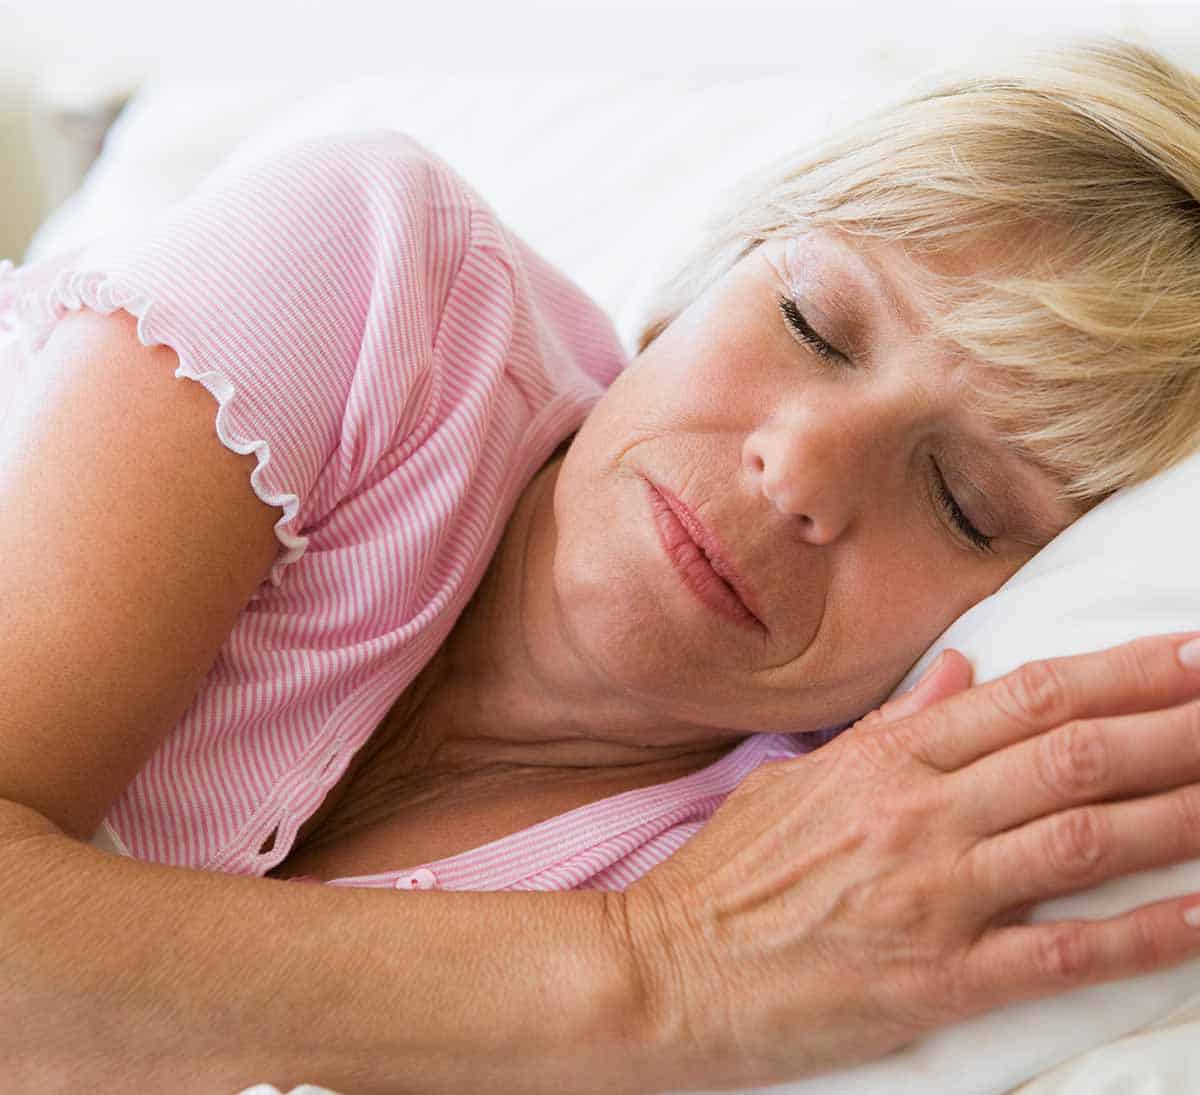 Women in midlife aren't sleeping enough, study says